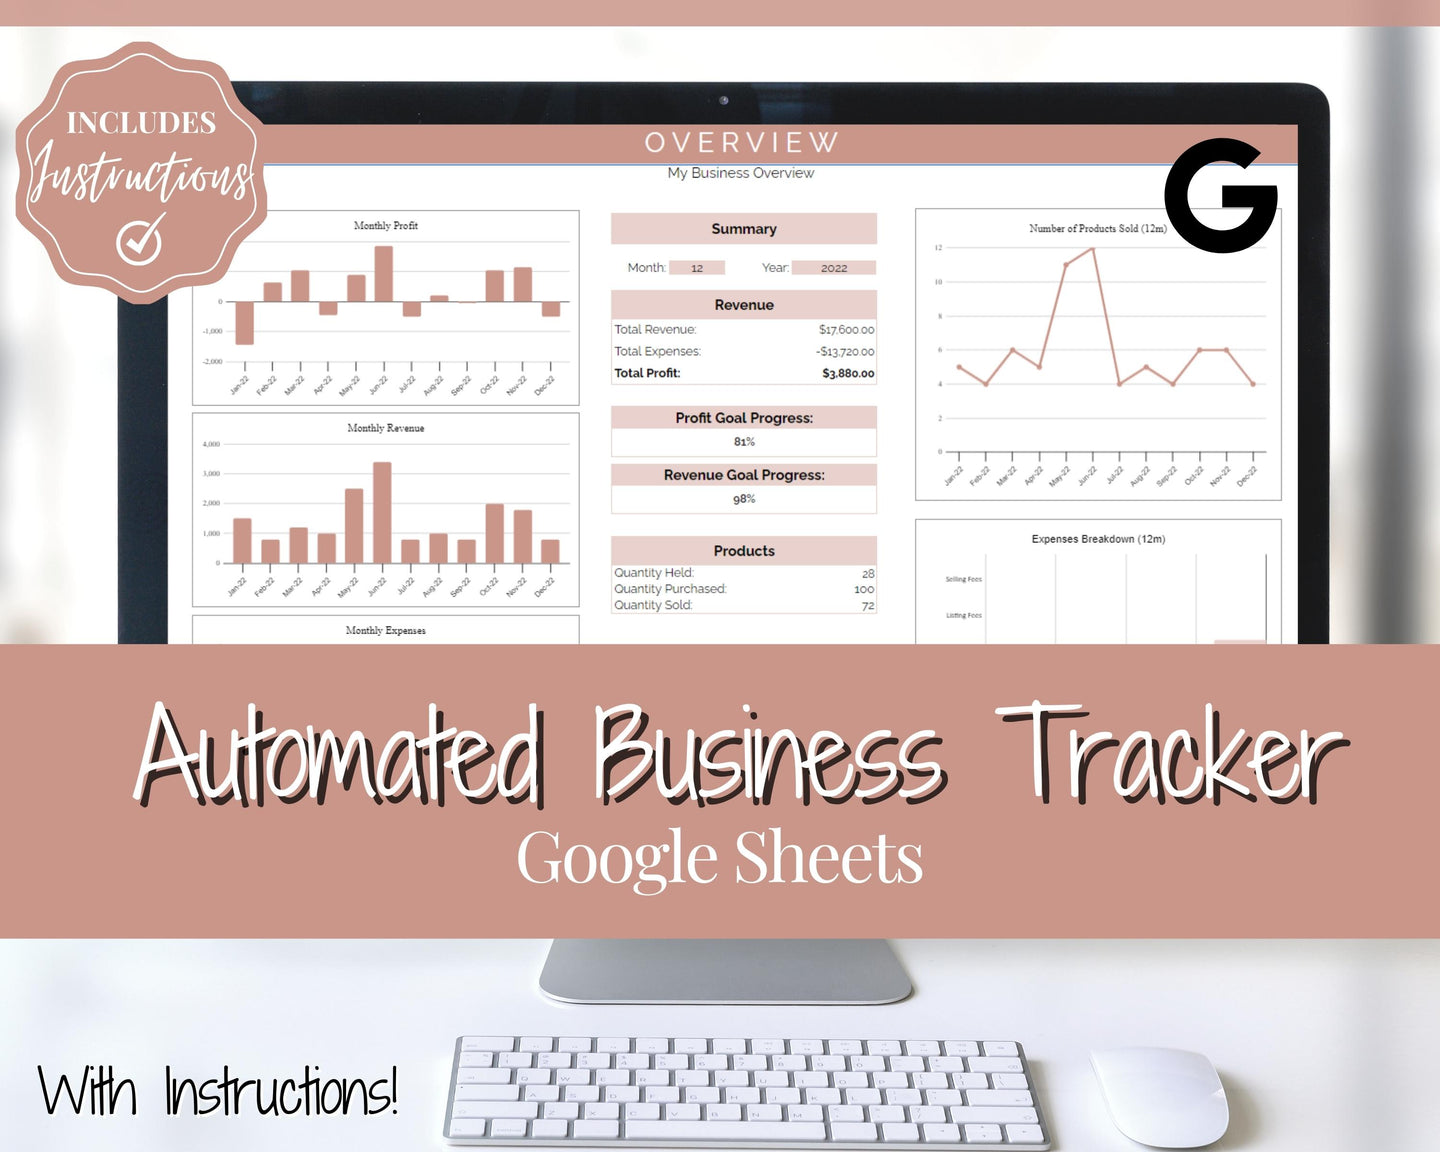 Small Business Bookkeeping Spreadsheet | Google Sheets Automated Business Expense Tracker & Product Invetory Tracker | Brown